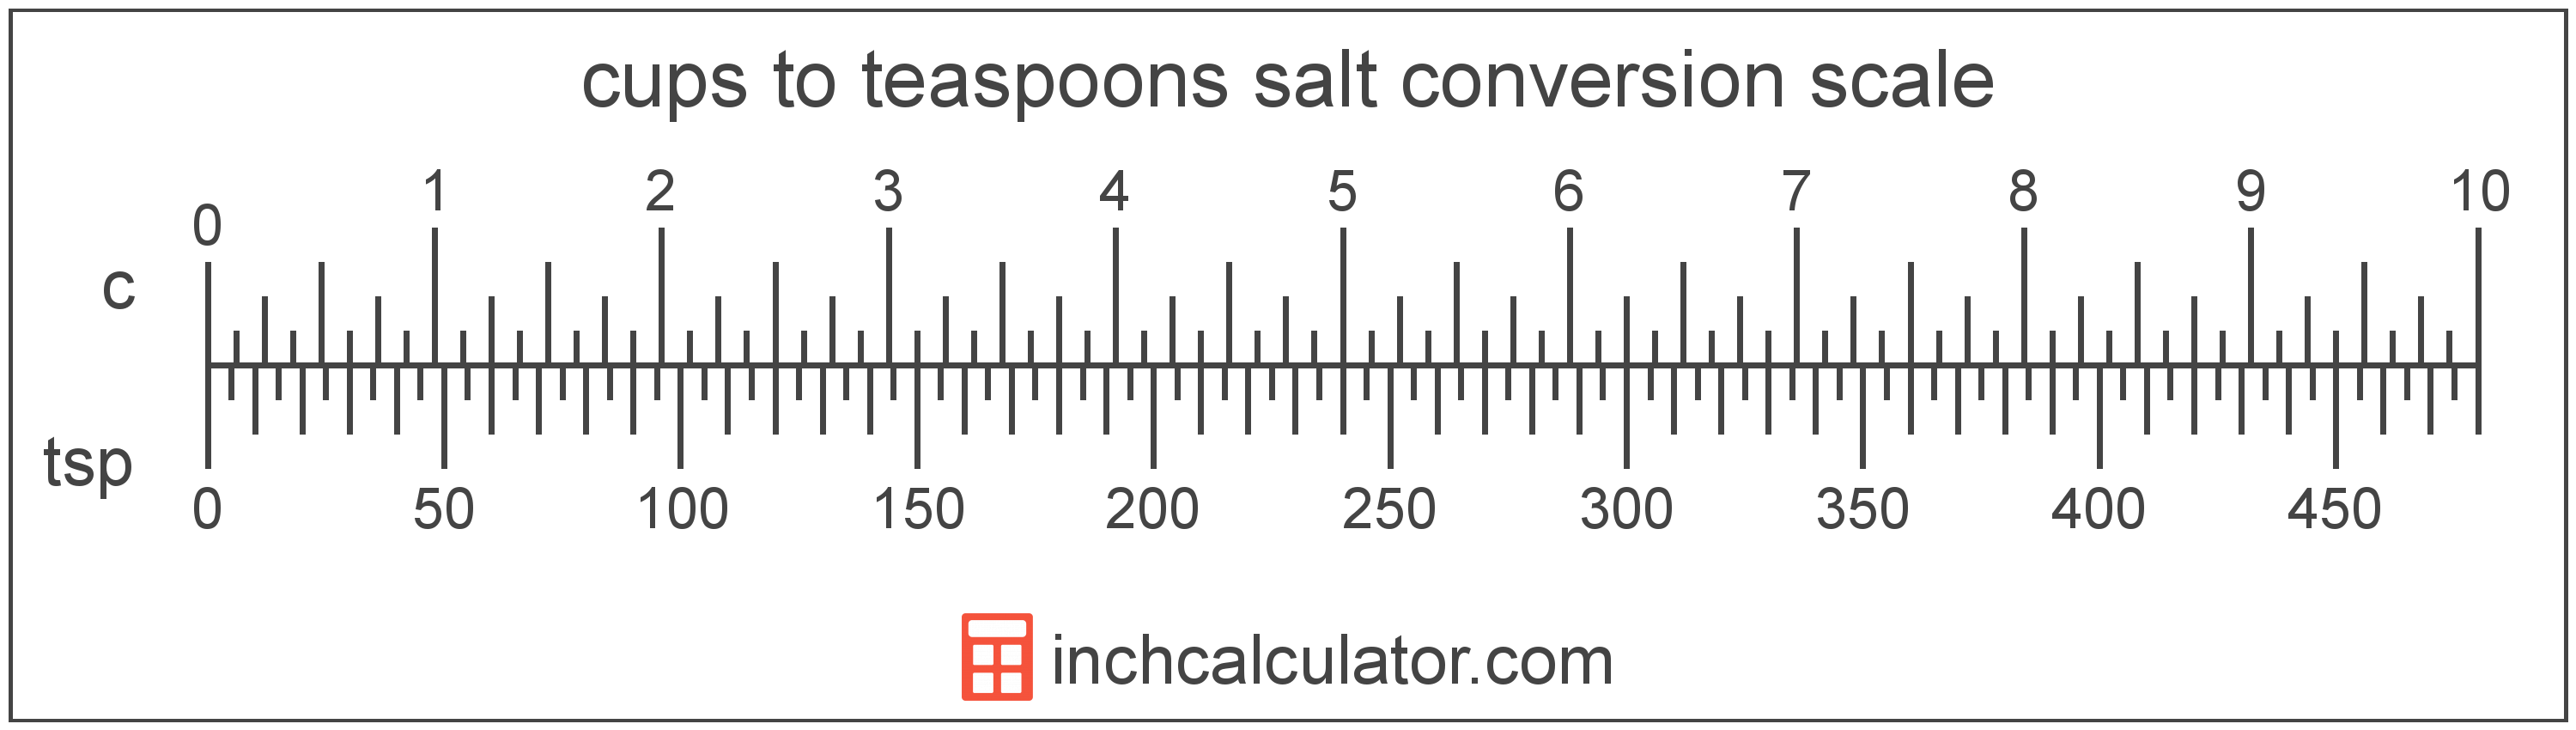 conversion scale showing cups and equivalent teaspoons salt volume values